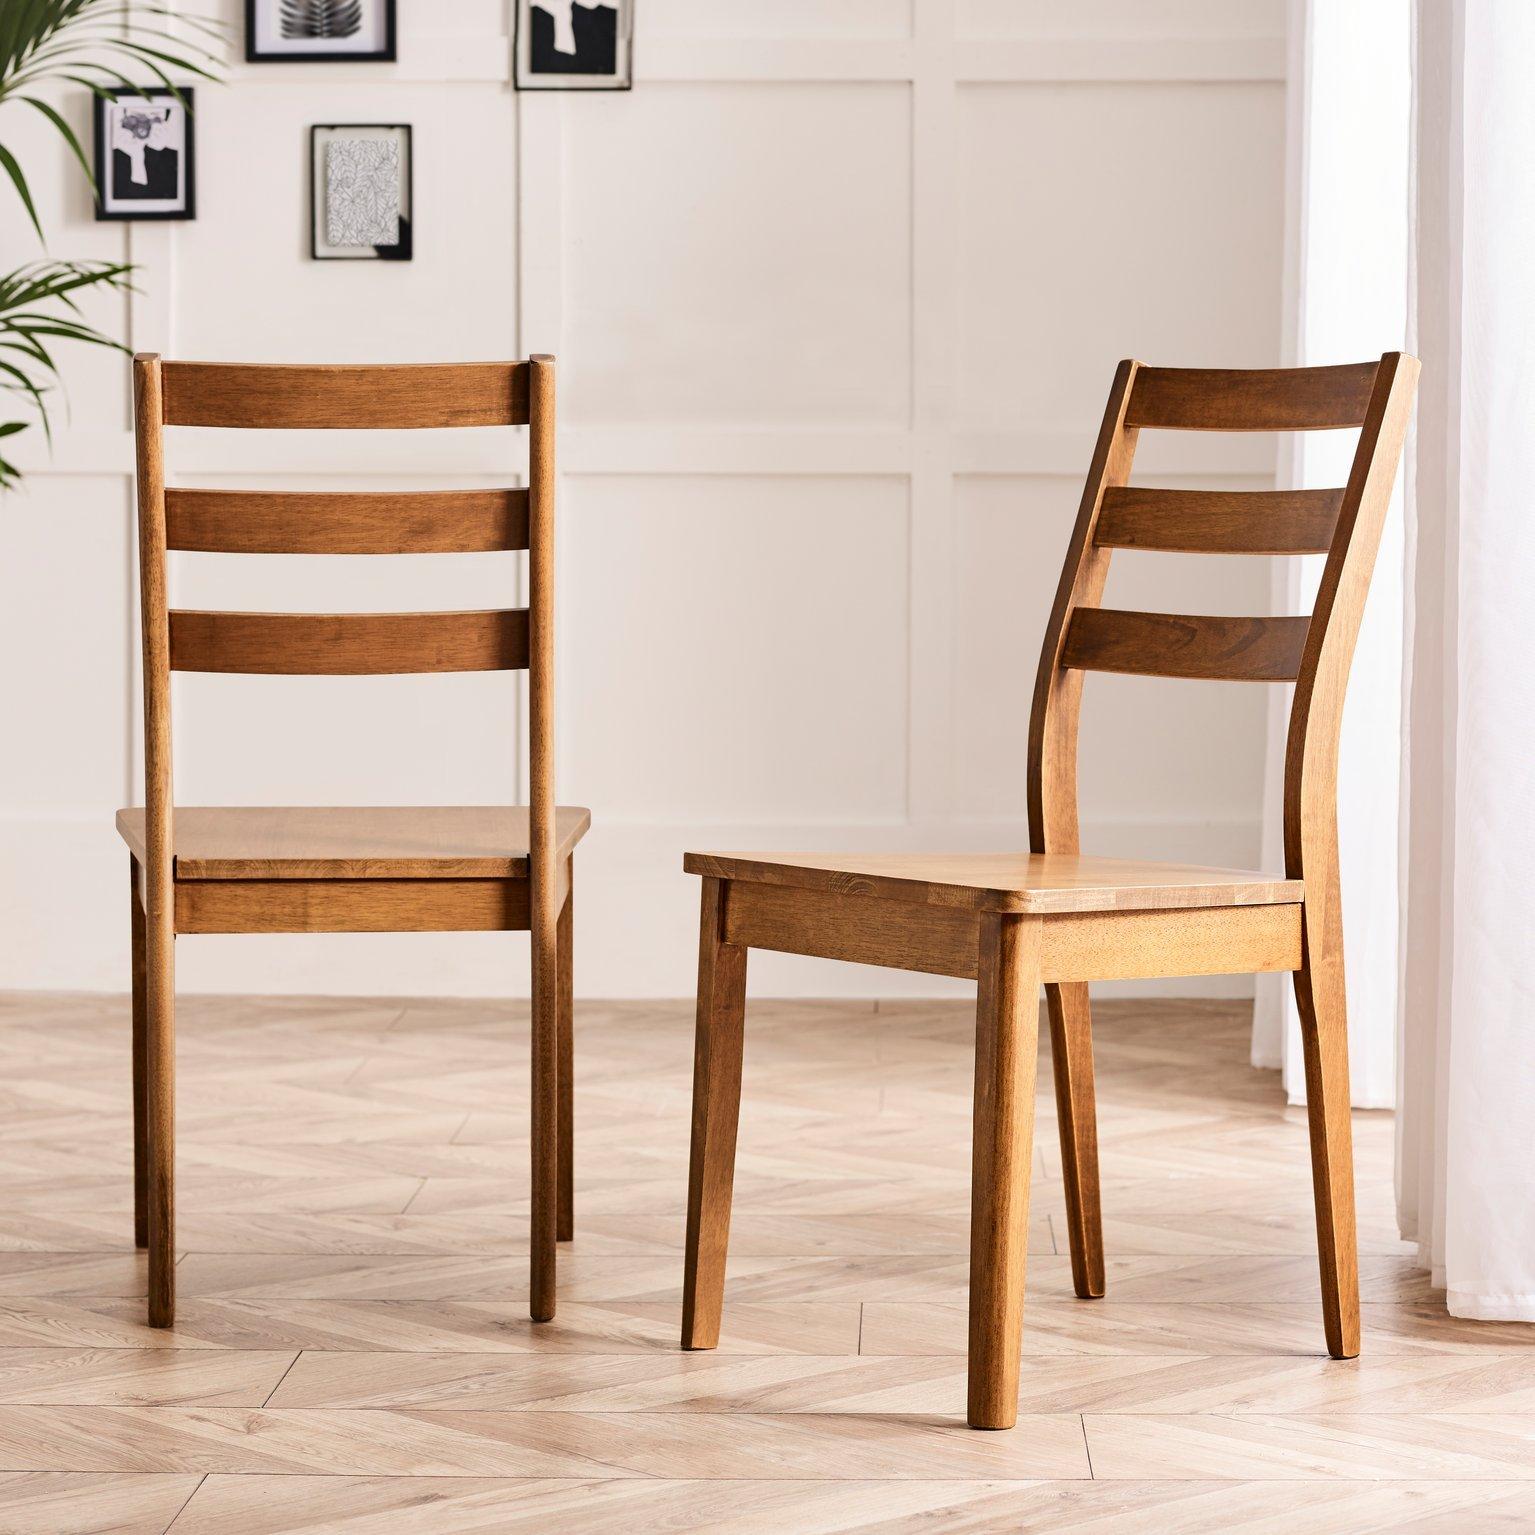 Set of 2 Lynton Walnut Colour Wooden Dining Chairs